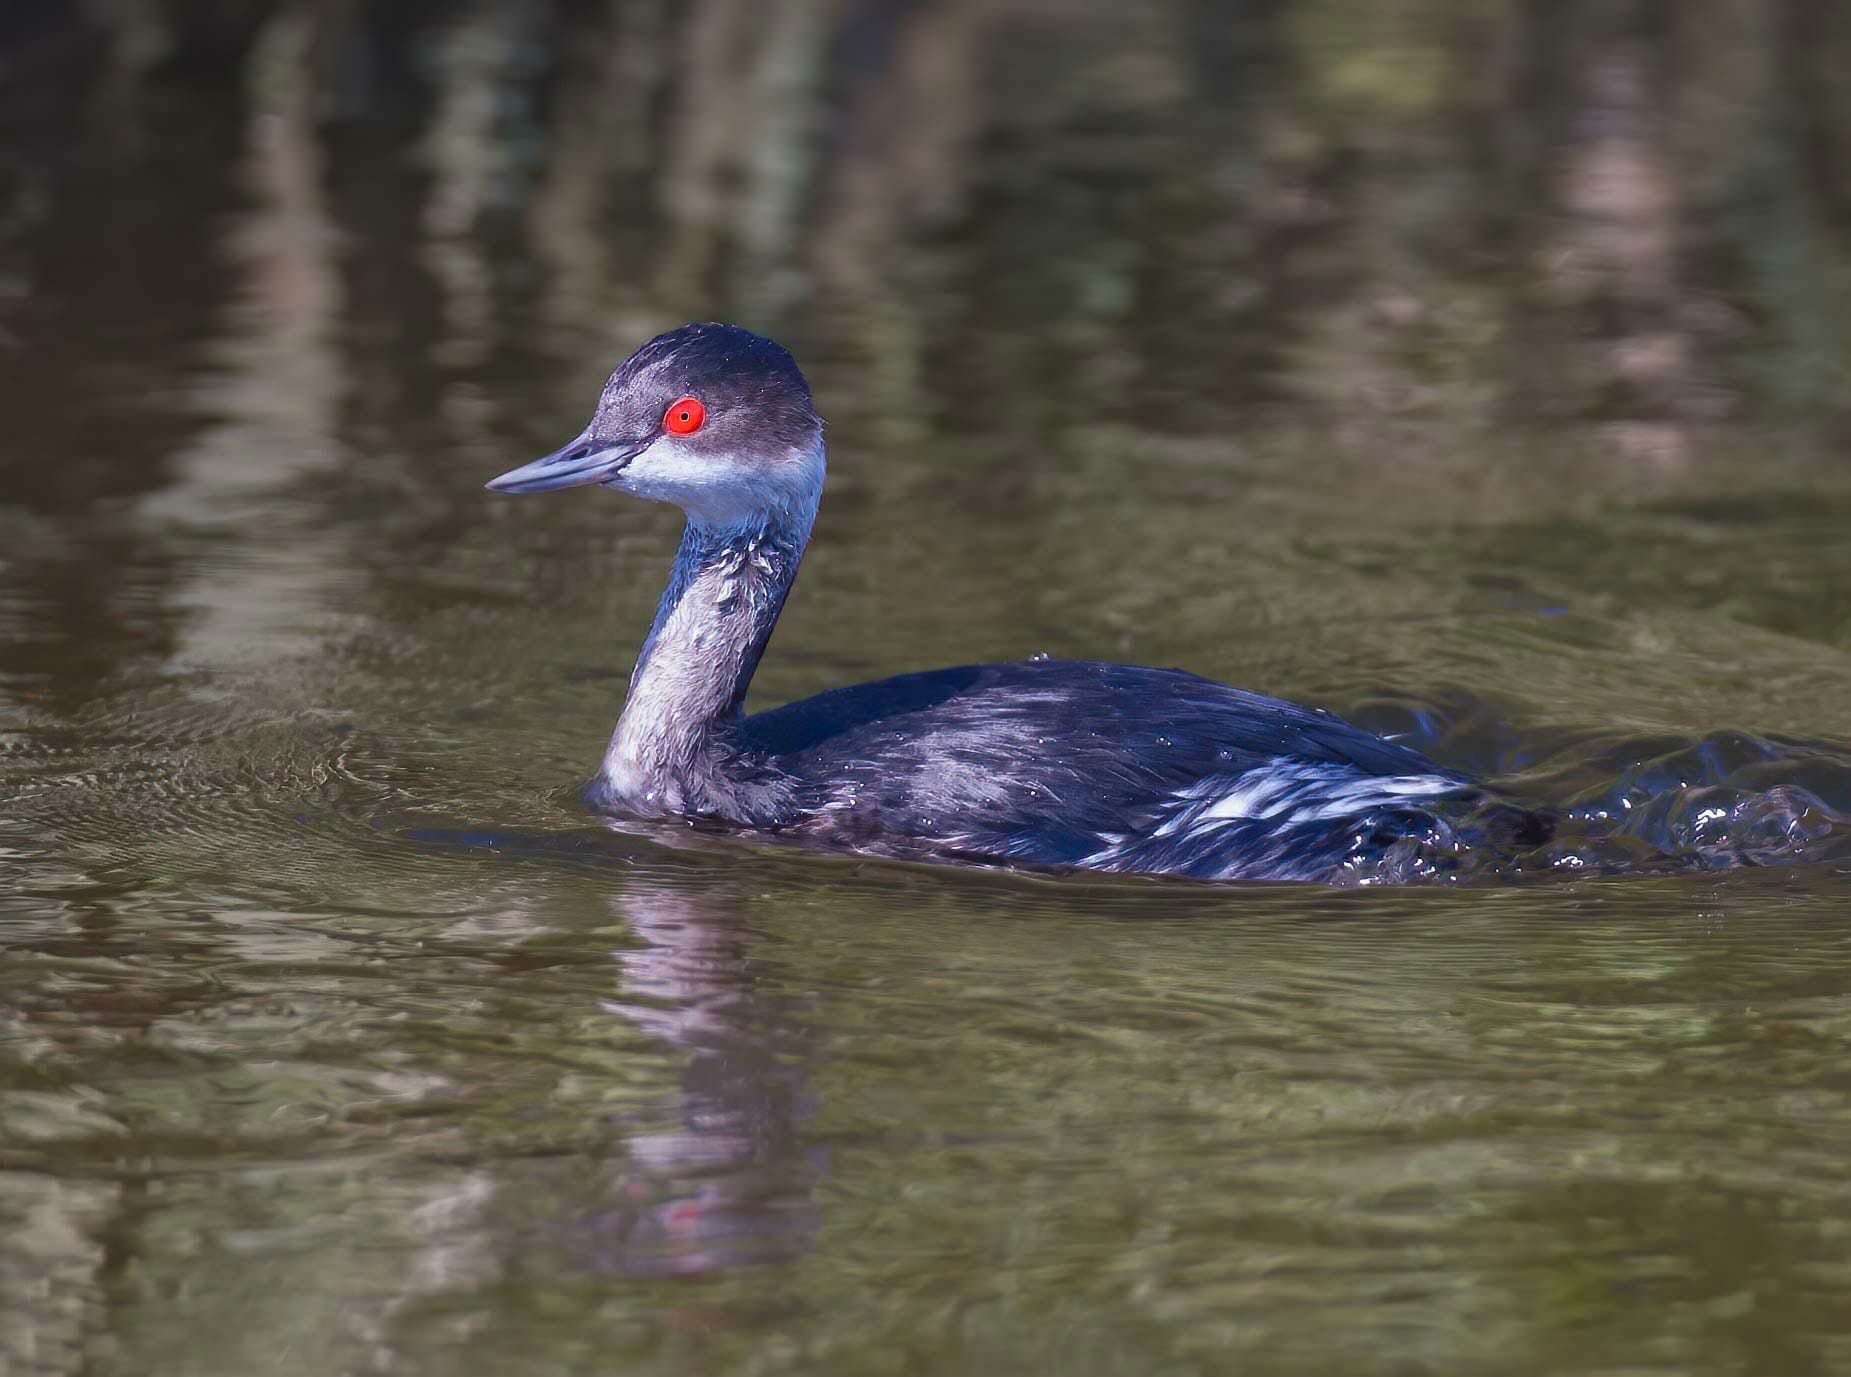 Black-necked Grebe swimming in water